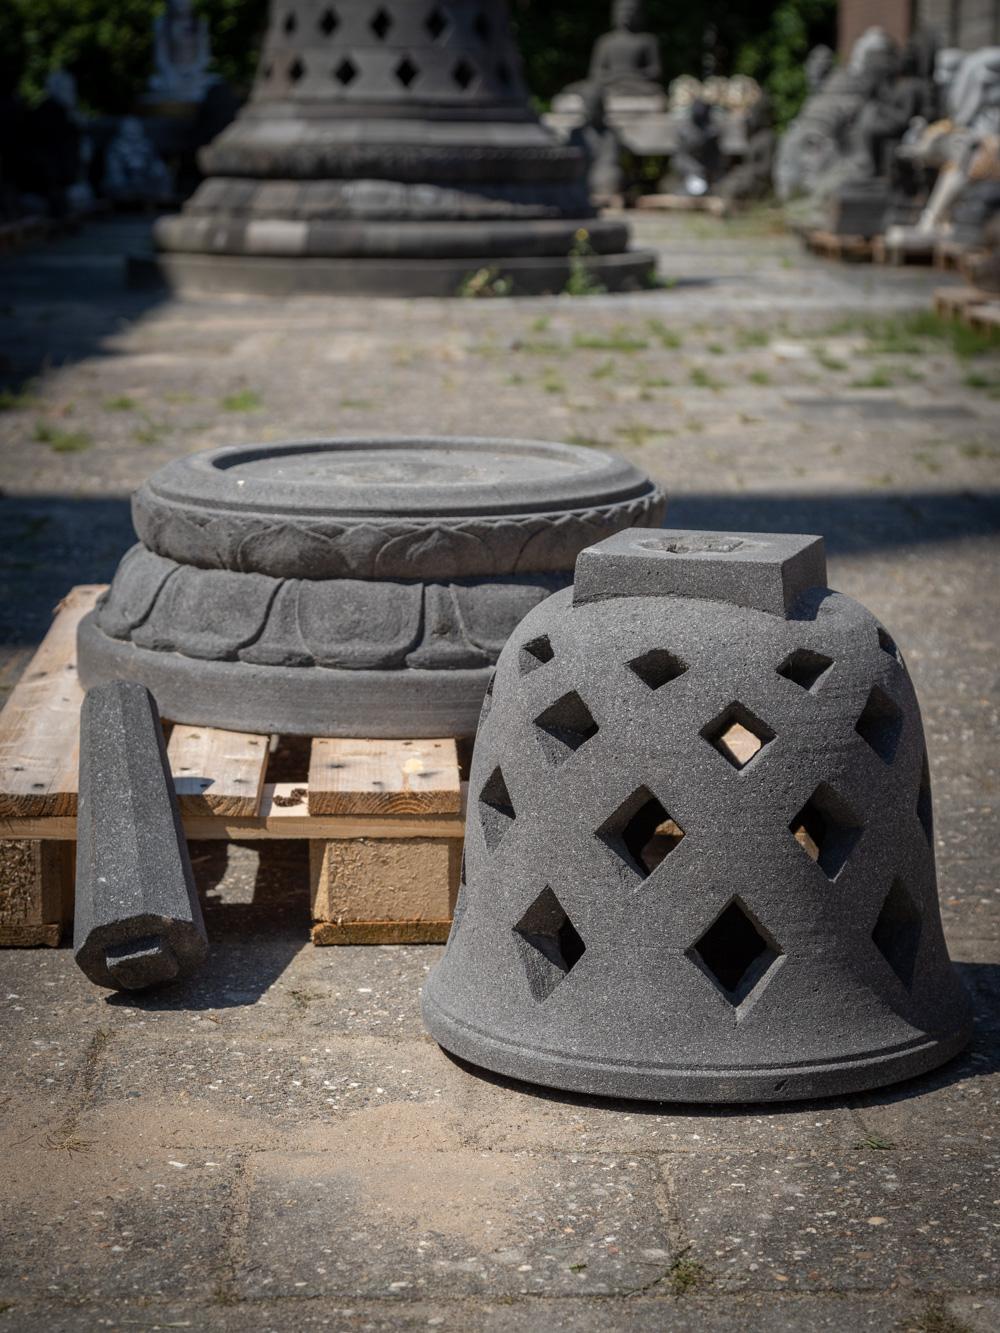 The lavastone Stupa from Indonesia is a remarkable piece that embodies the spiritual and cultural traditions of the region. Crafted from lavastone, this Stupa stands tall at 93 cm in height and has a diameter of 72 cm. The use of lavastone adds a